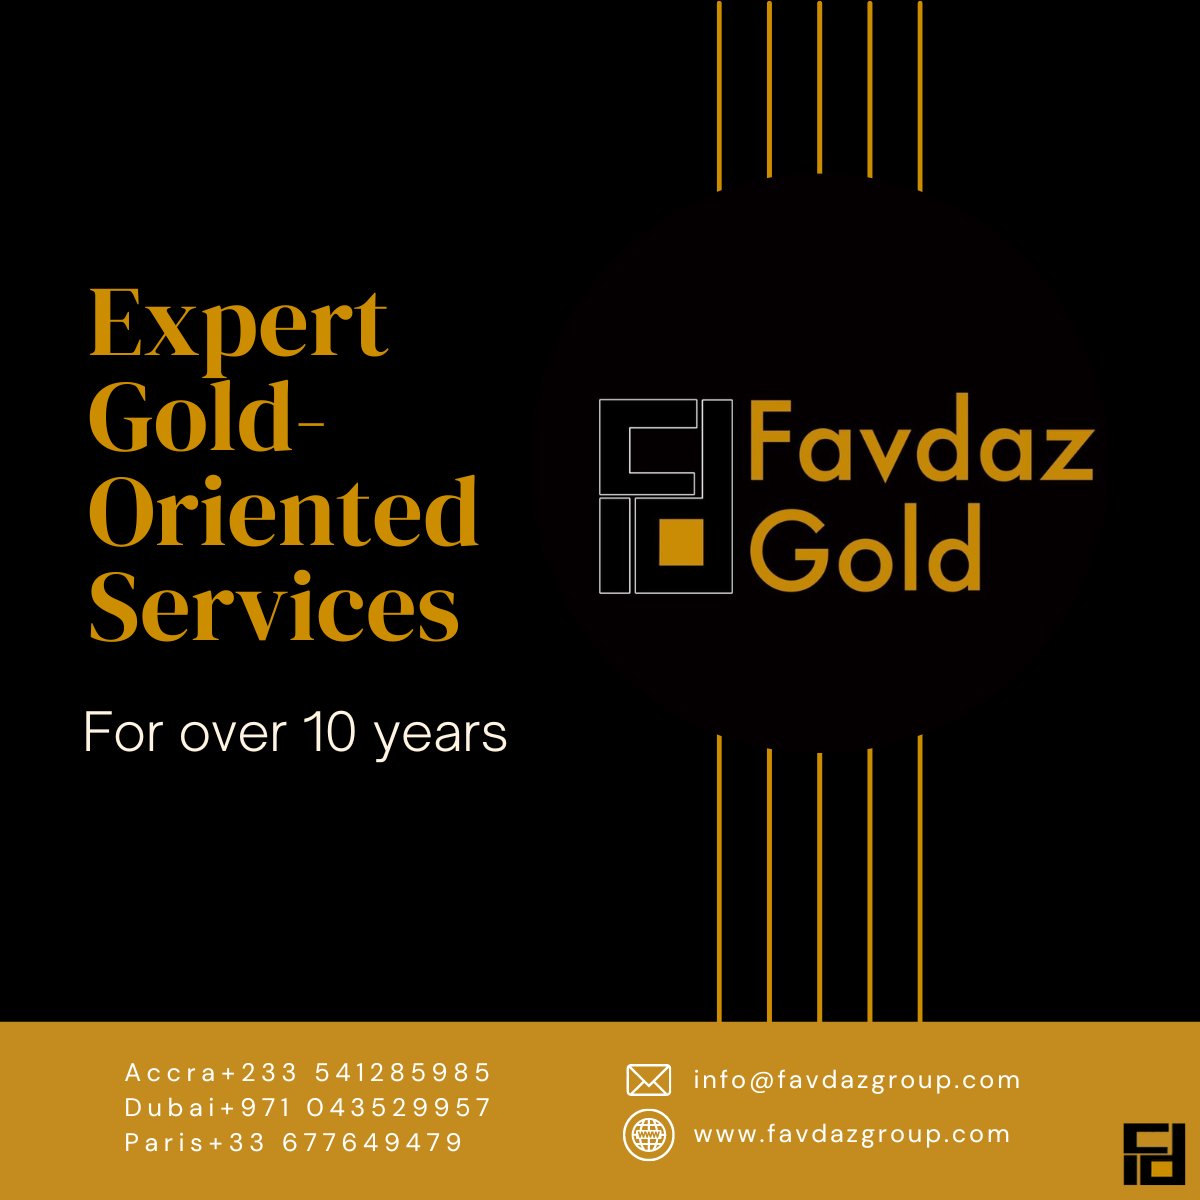 Favdaz Gold offers expert gold-oriented services for over 10 years!

With our 4 offices worldwide🌍whether you're looking for 22-23k, 24k gold bars; or gold export services, we've got you covered on CIF basis. 

#FavdazGold #GoldExport #GoldBars #CIFBasis #goldbar #bullion #doré